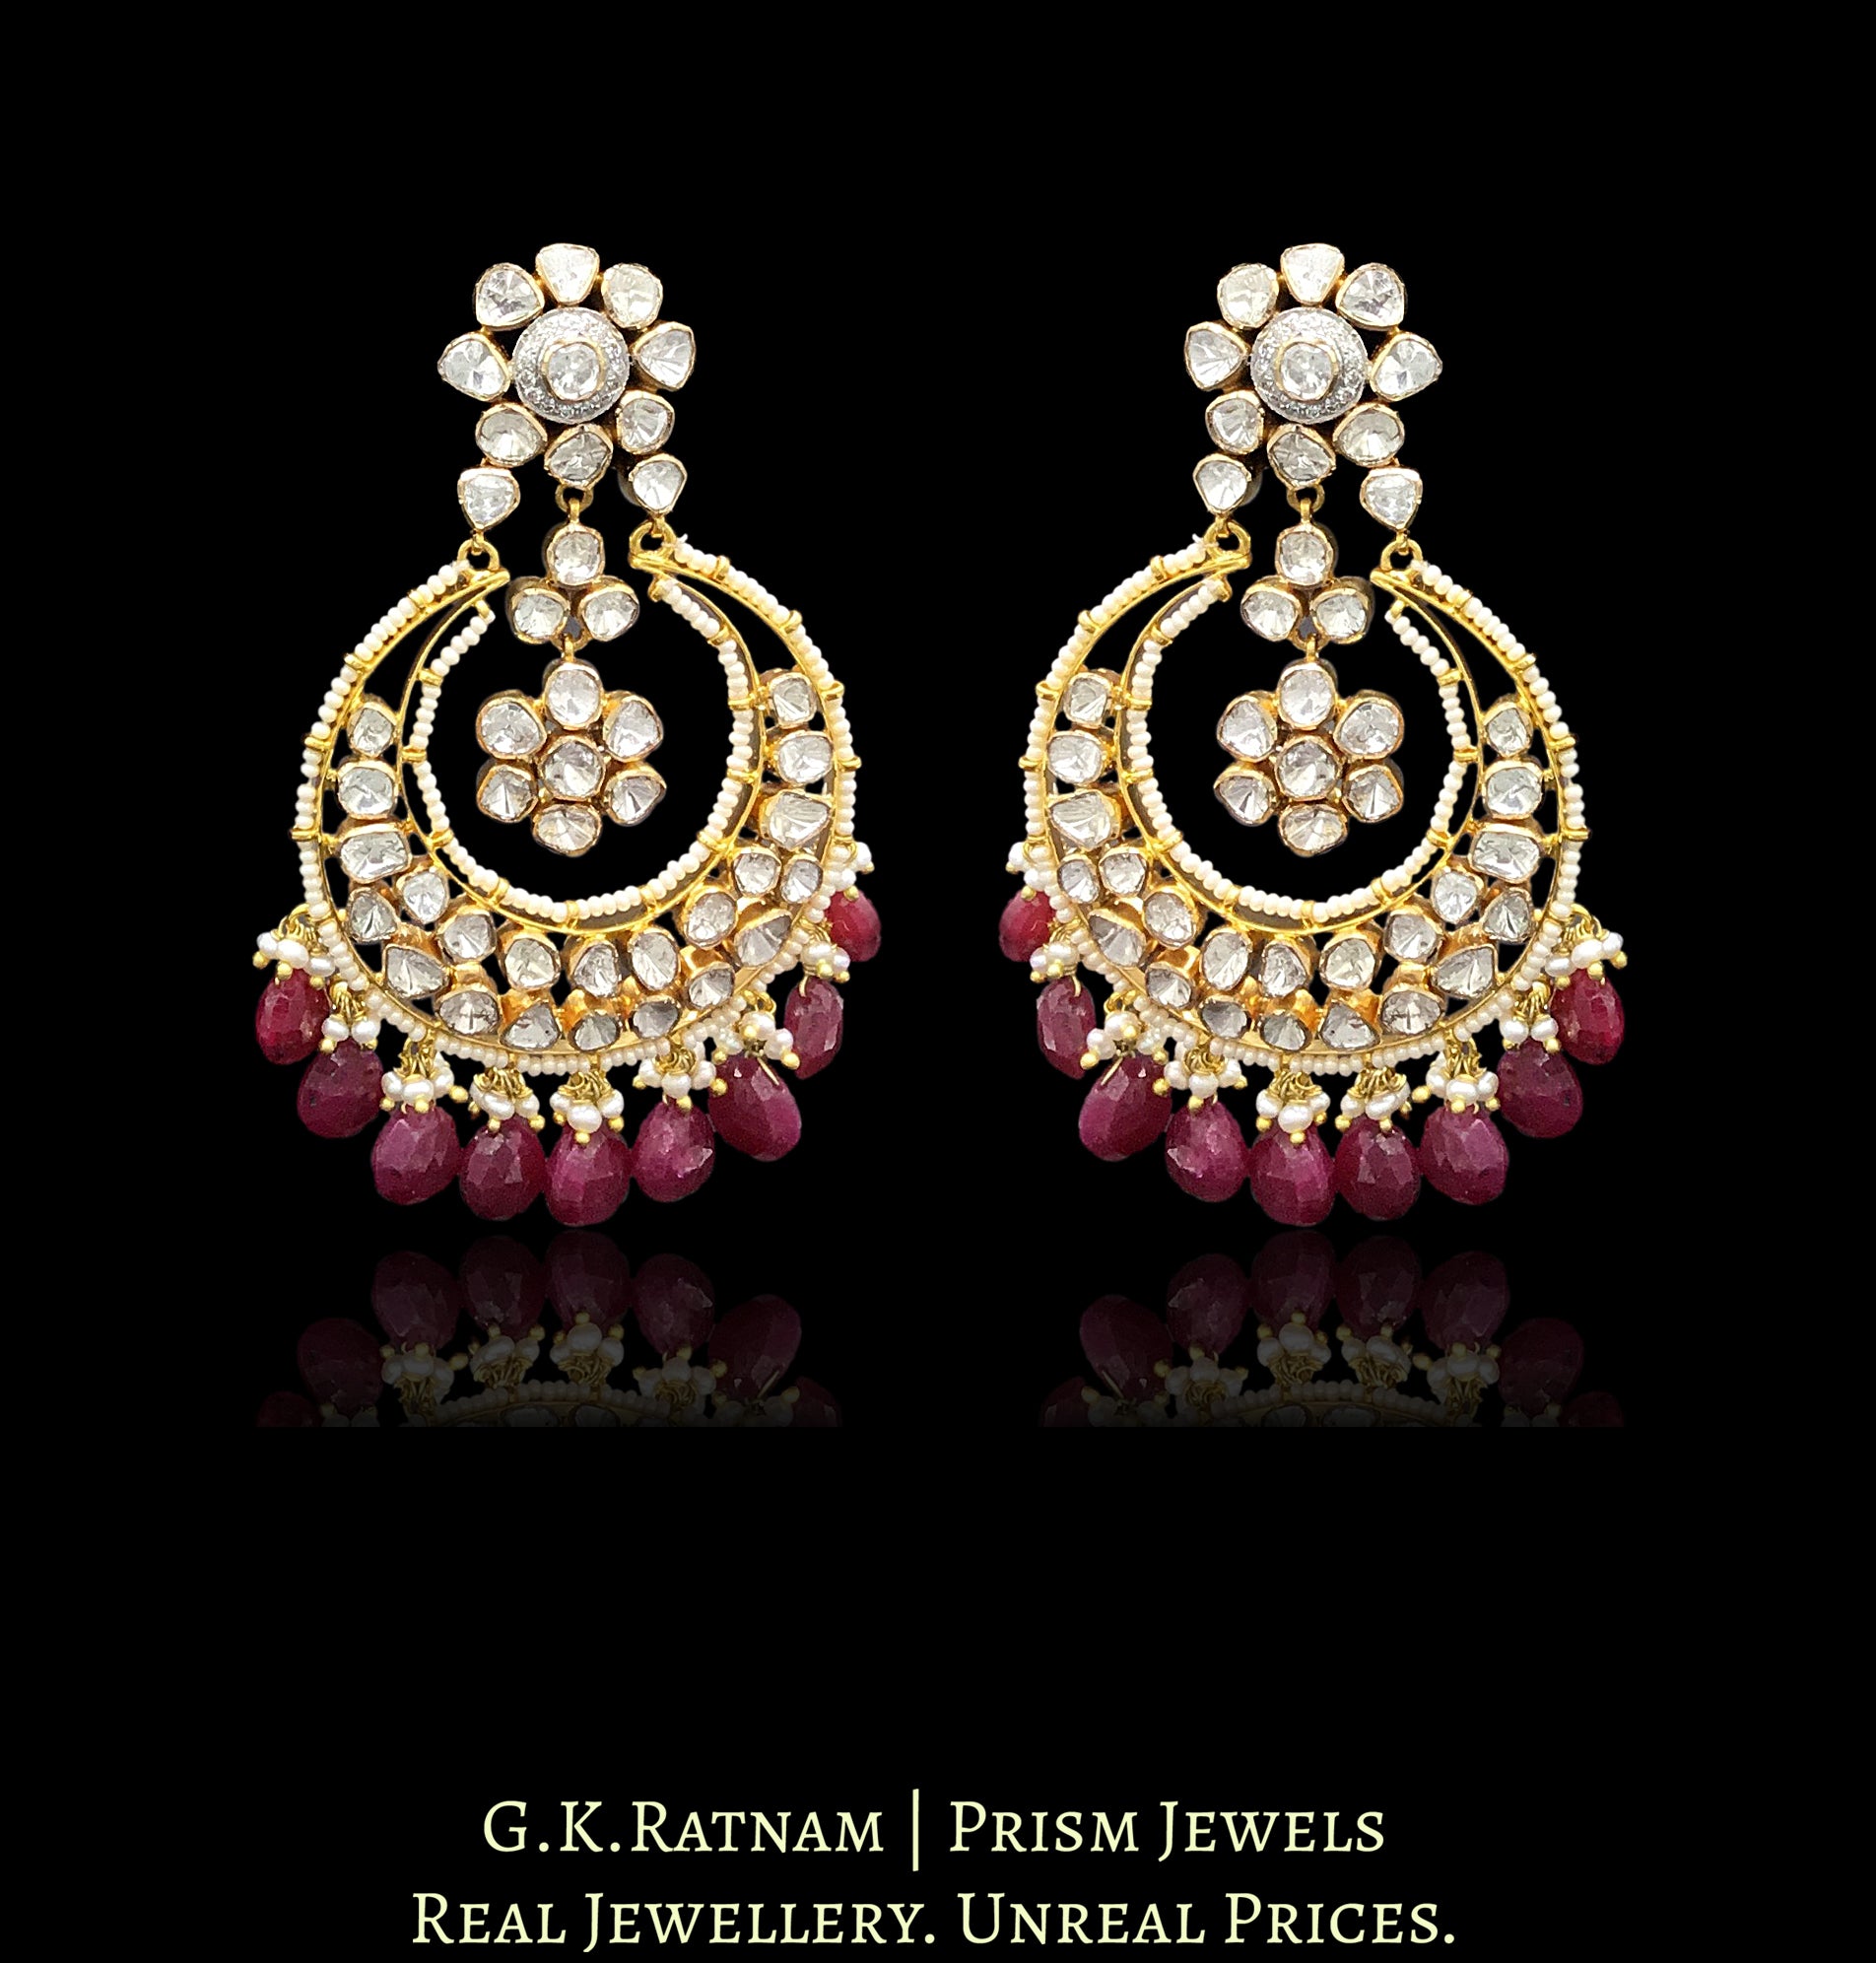 18k Gold and Diamond Polki Open Setting Chand Bali Earring Pair with Rubies - G. K. Ratnam